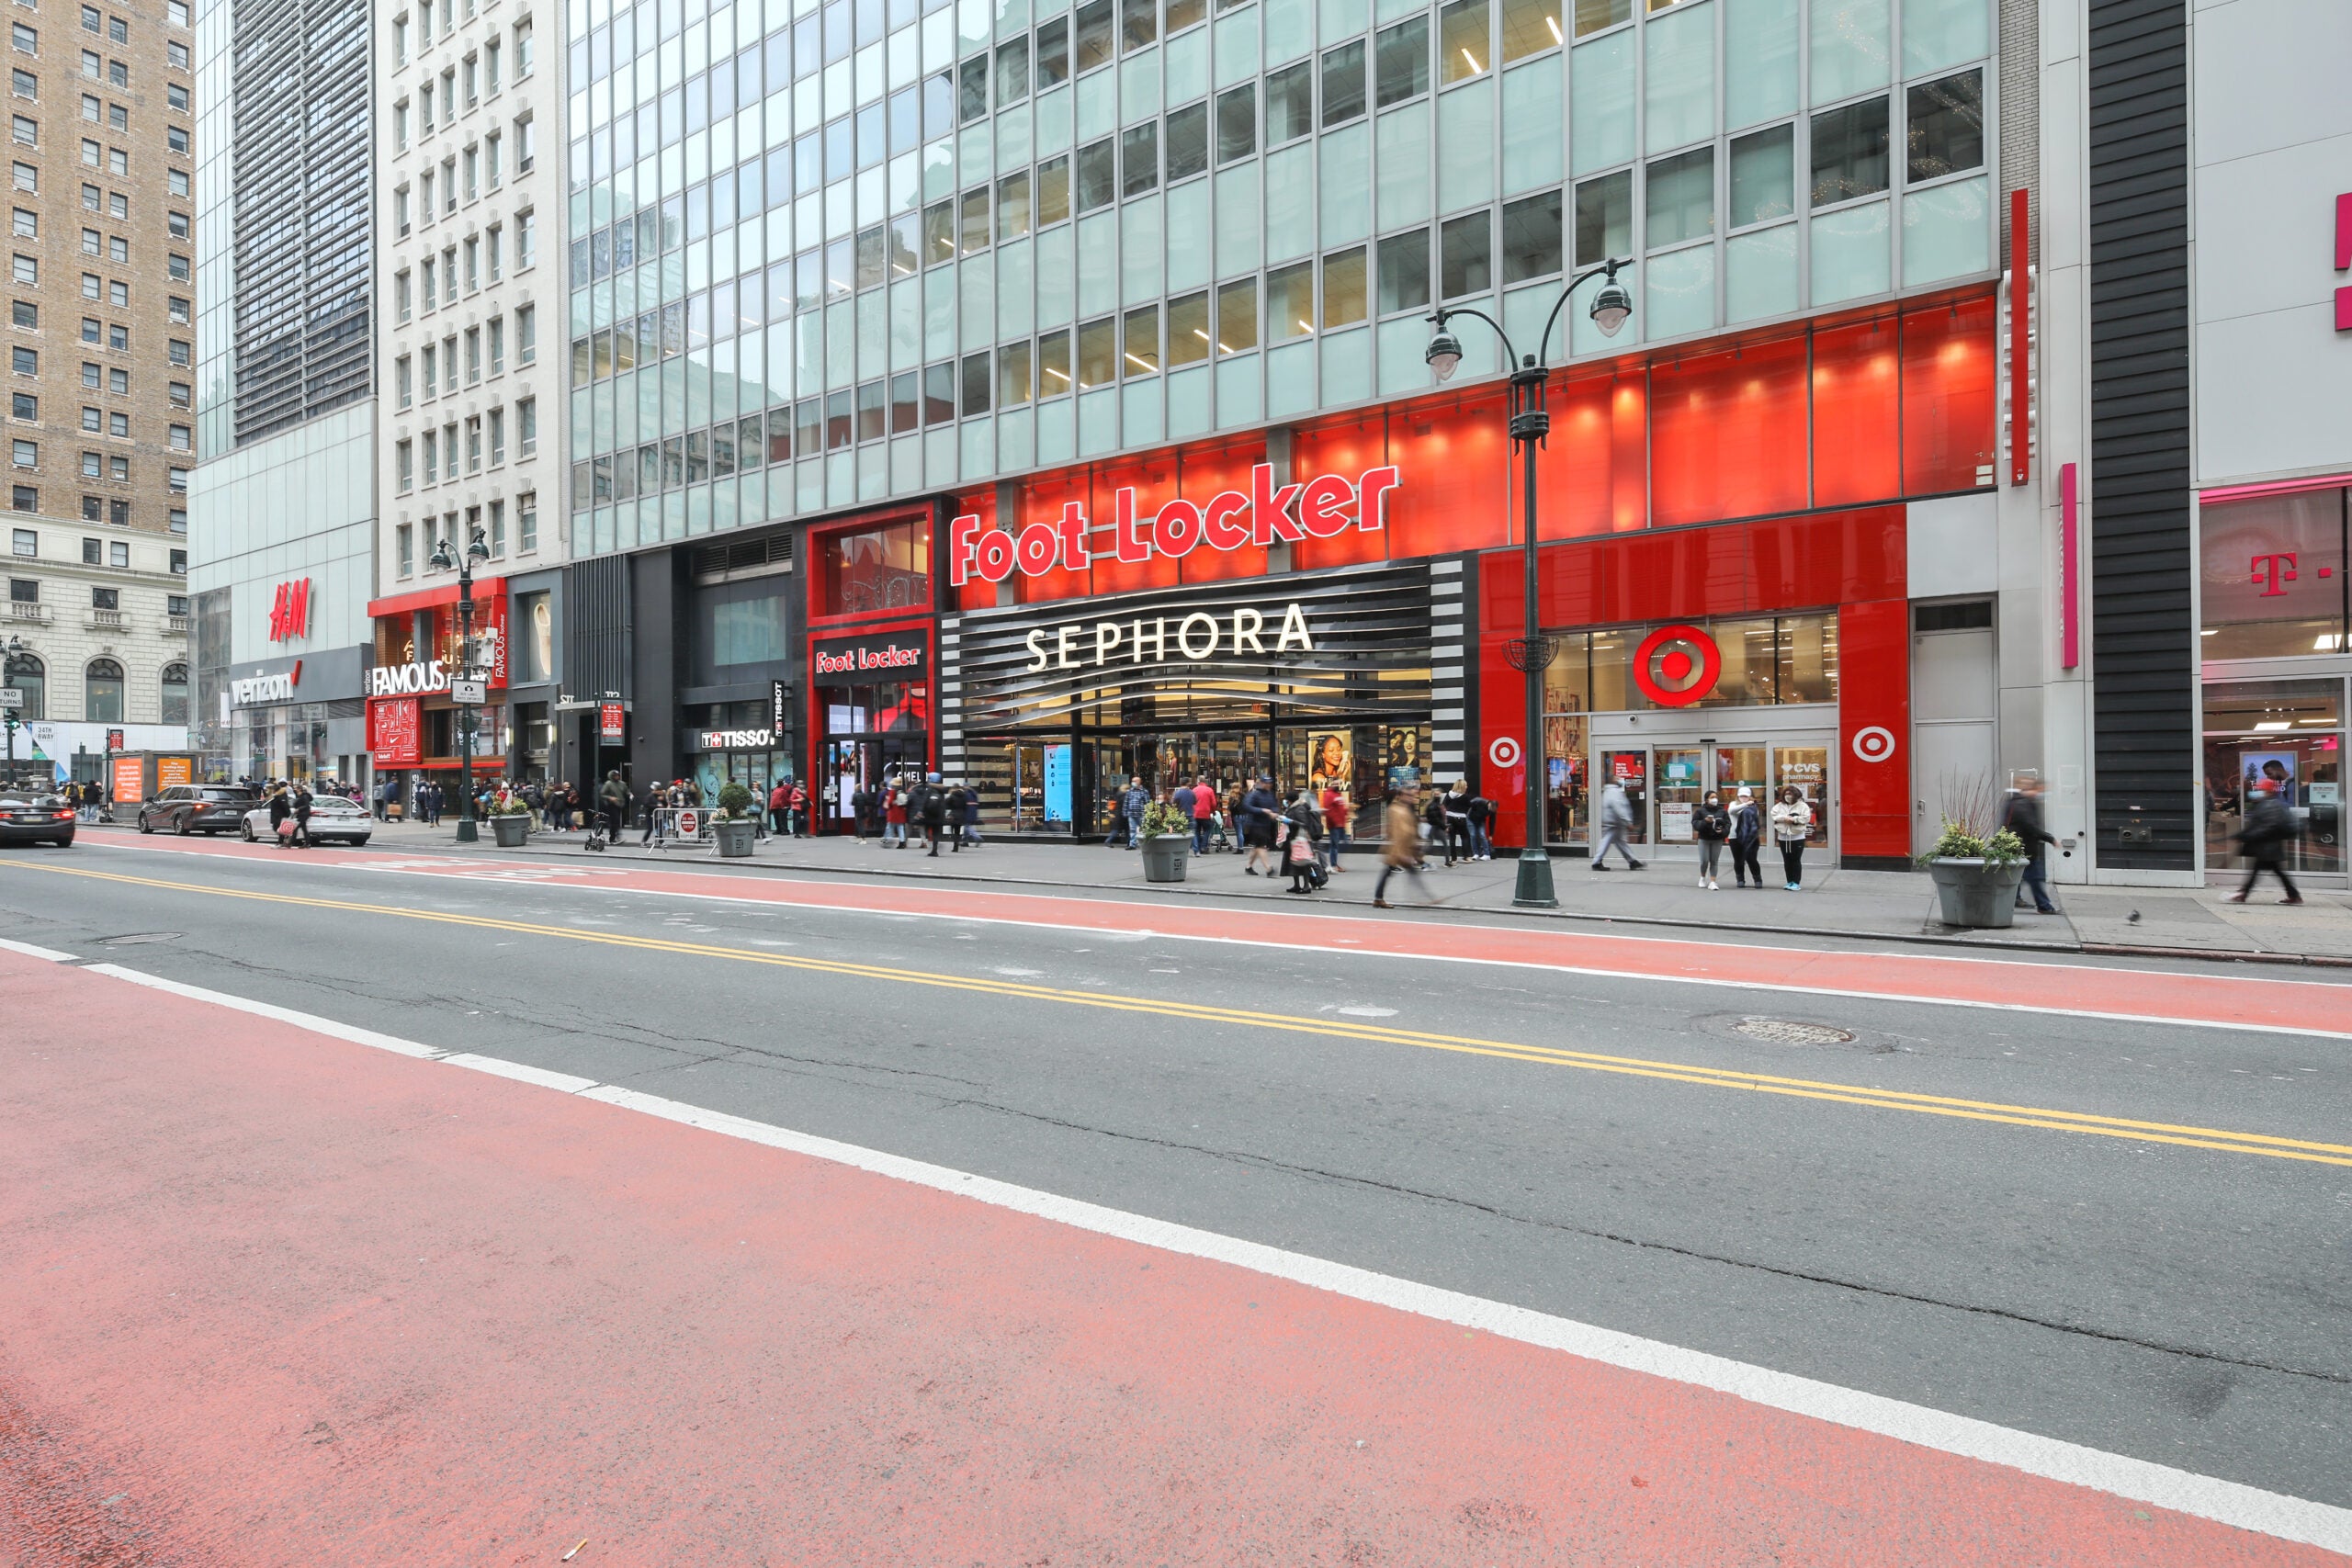 Street view of Foot Locker and Sephora on 112 West 34th Street